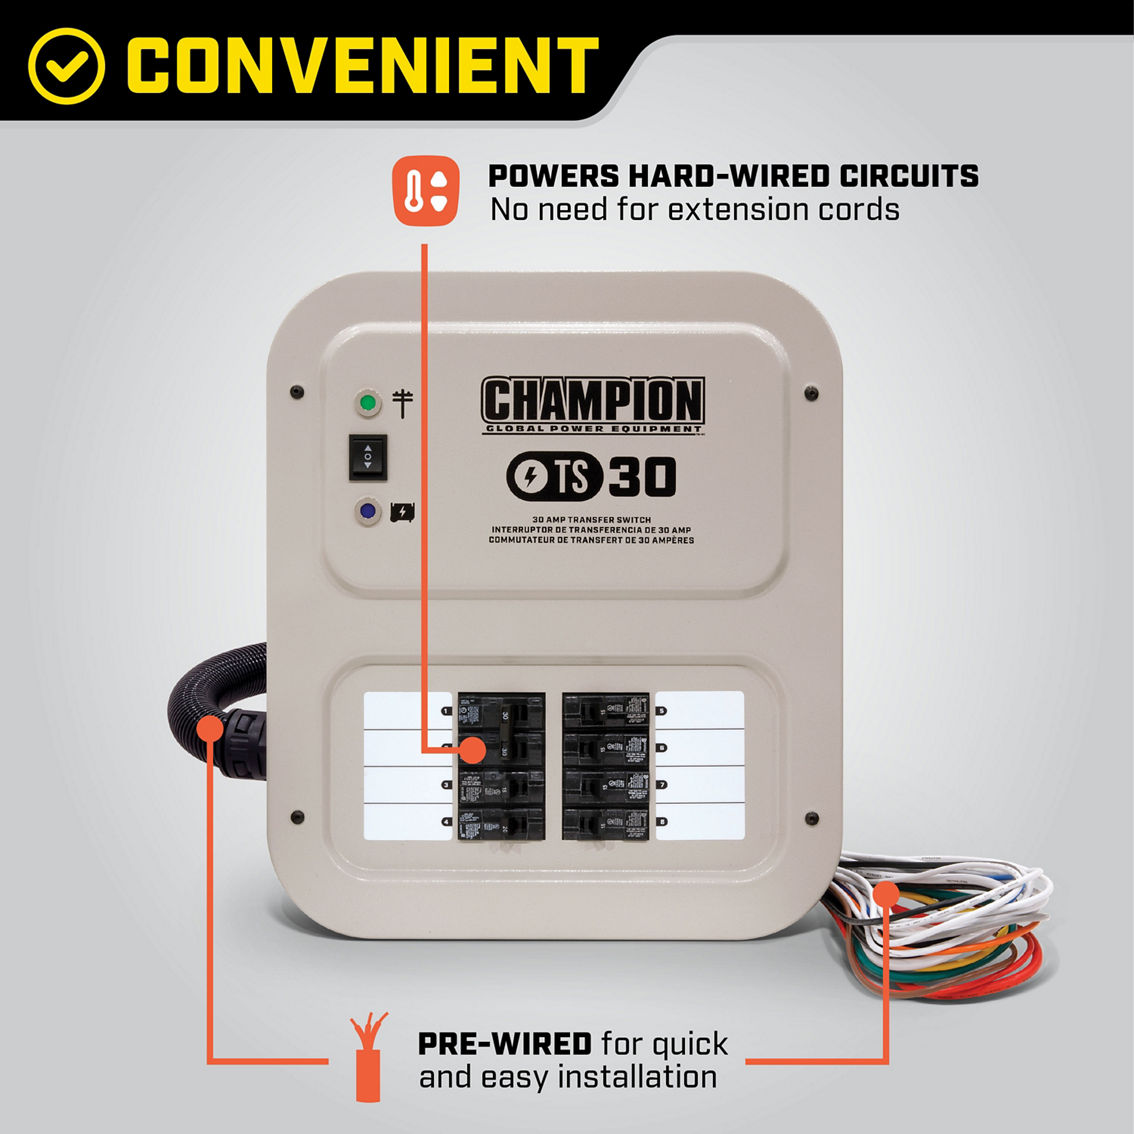 Champion 30-Amp Manual Transfer Switch with 25 ft. Power Cord and Power Inlet Box - Image 6 of 10